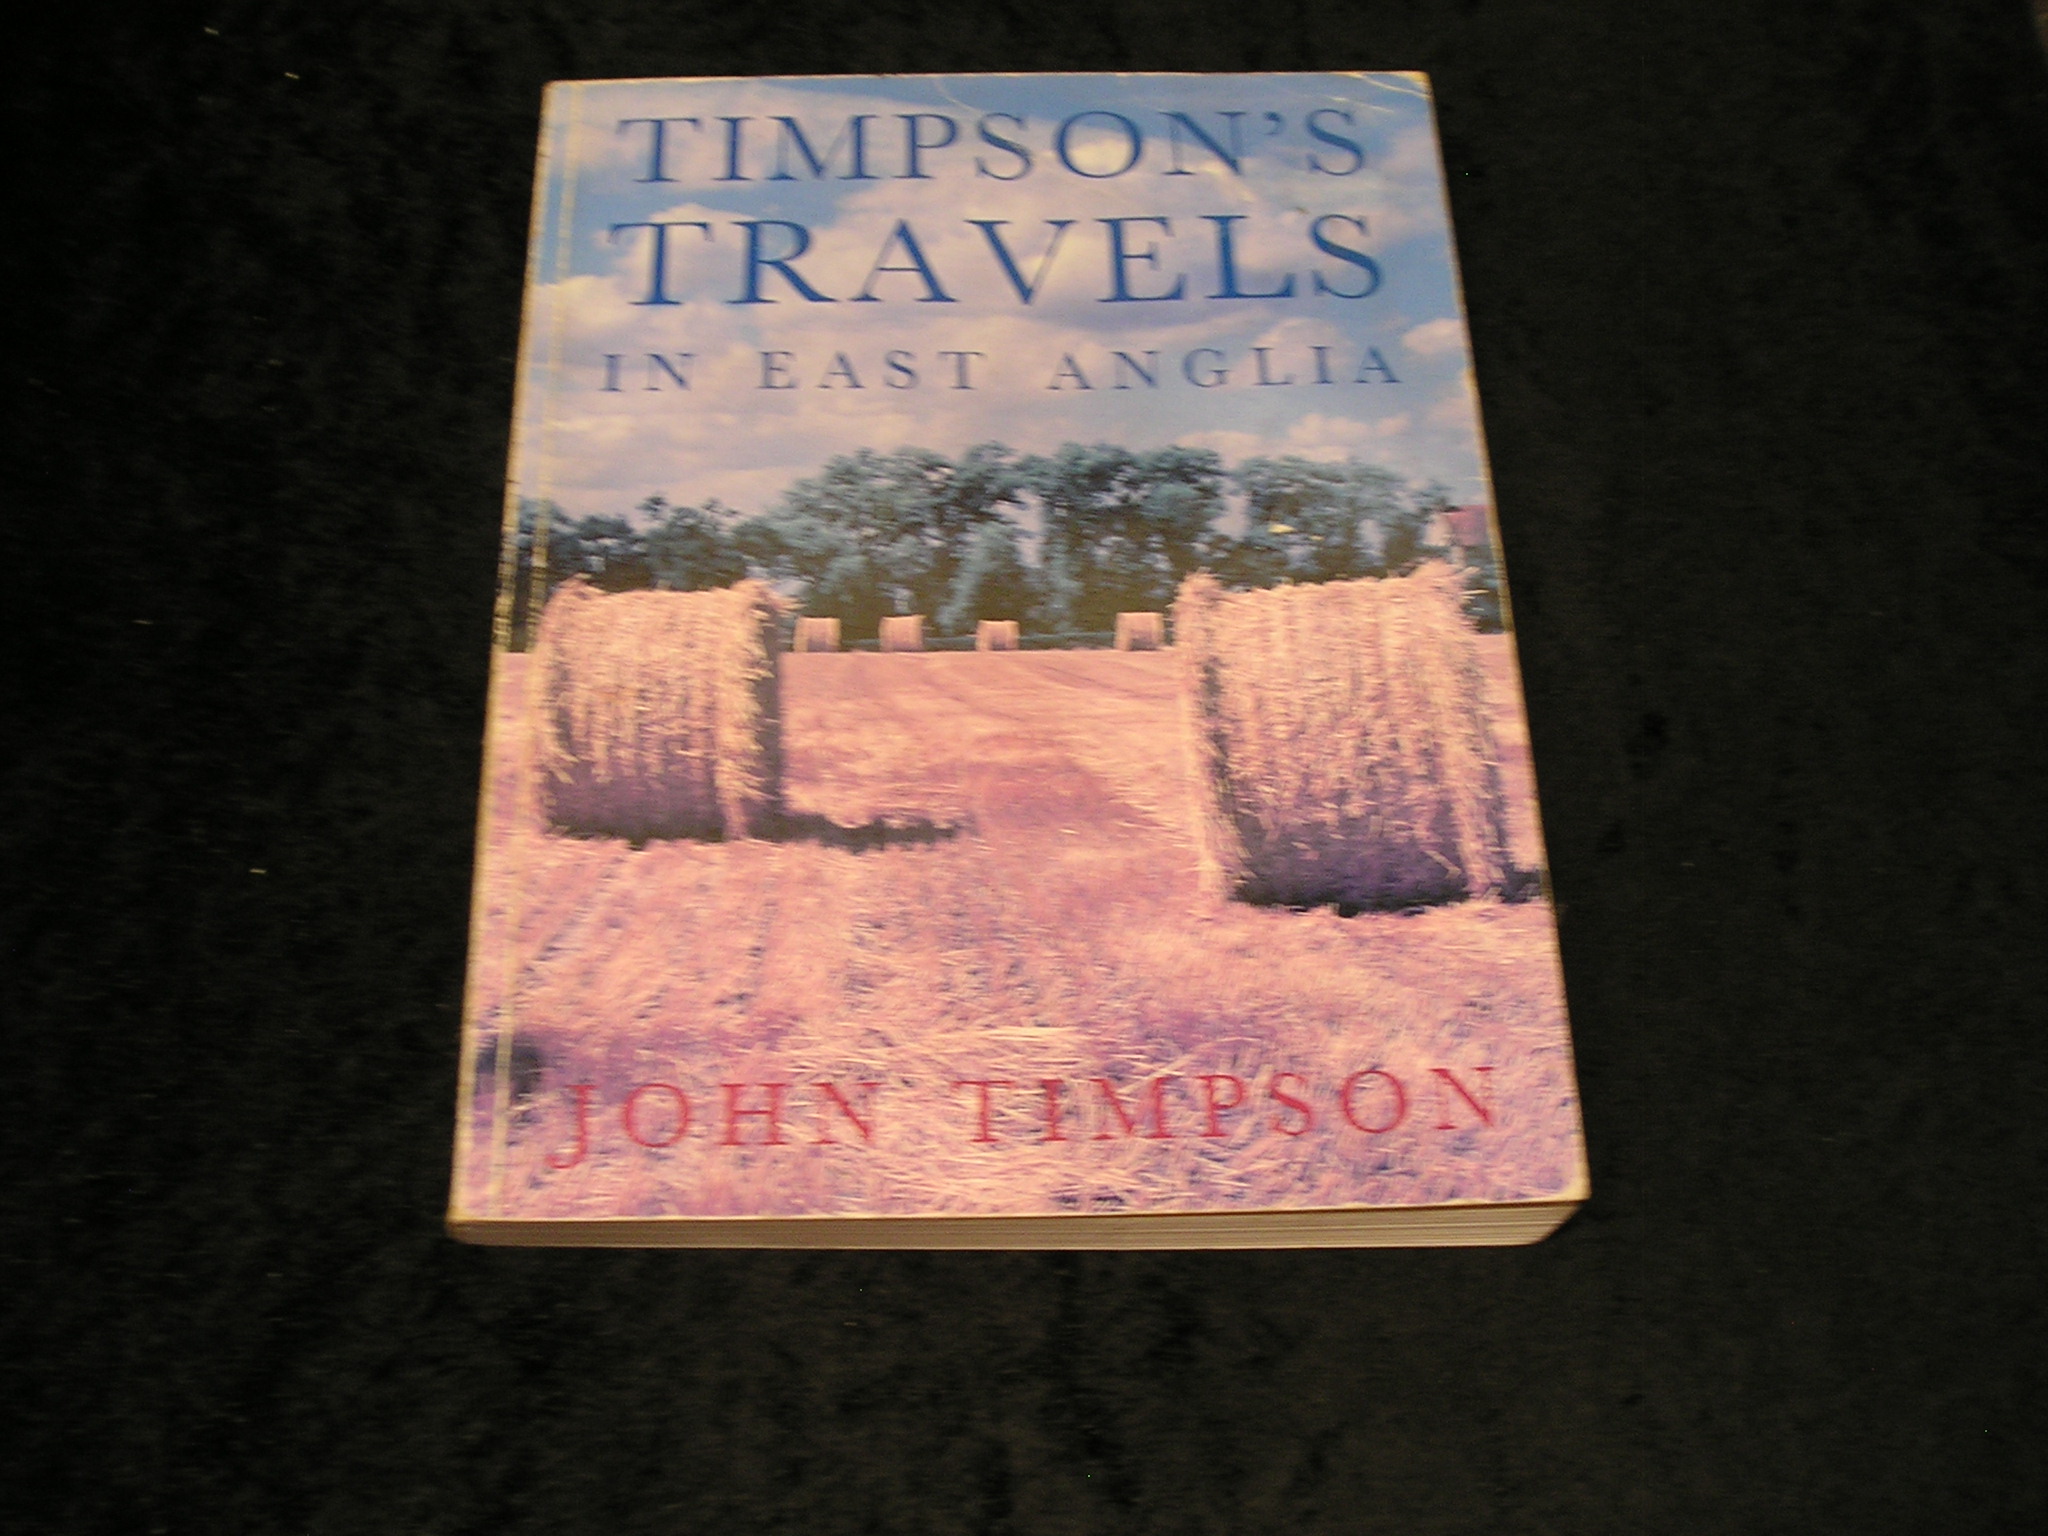 Timpson's Travels in East Anglia